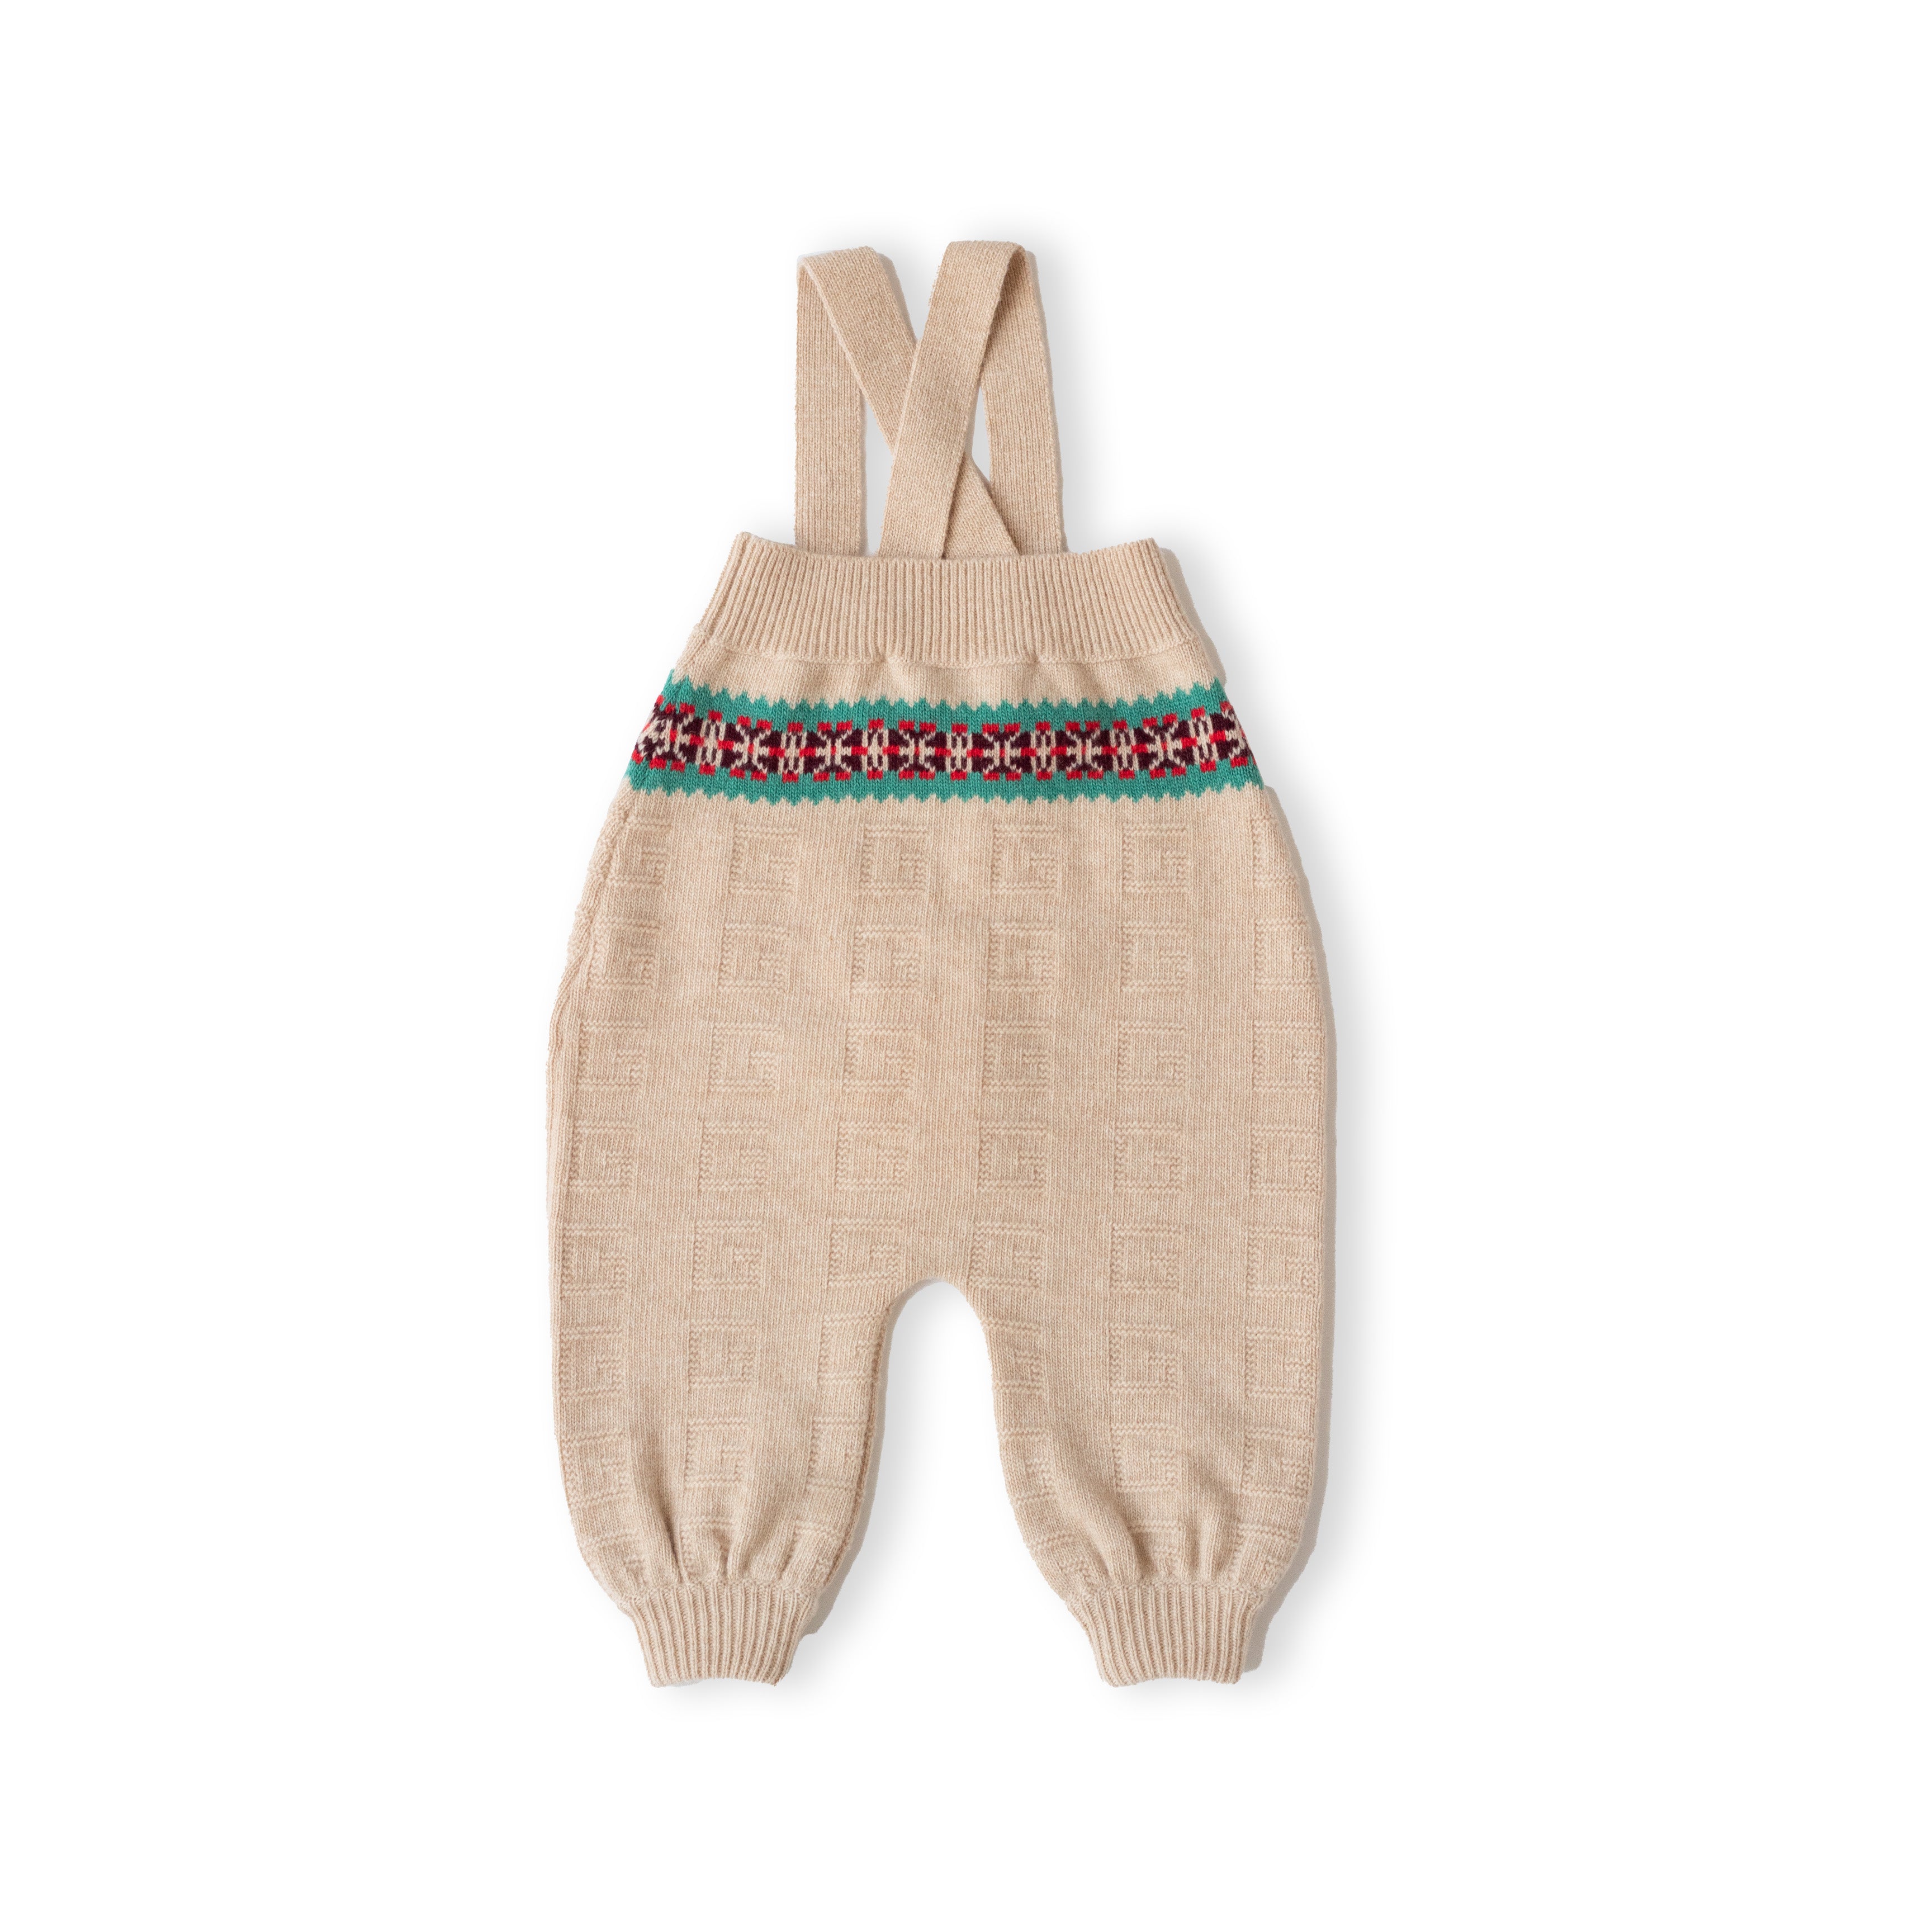 Baby's Wool Dungarees with Square G motif Front